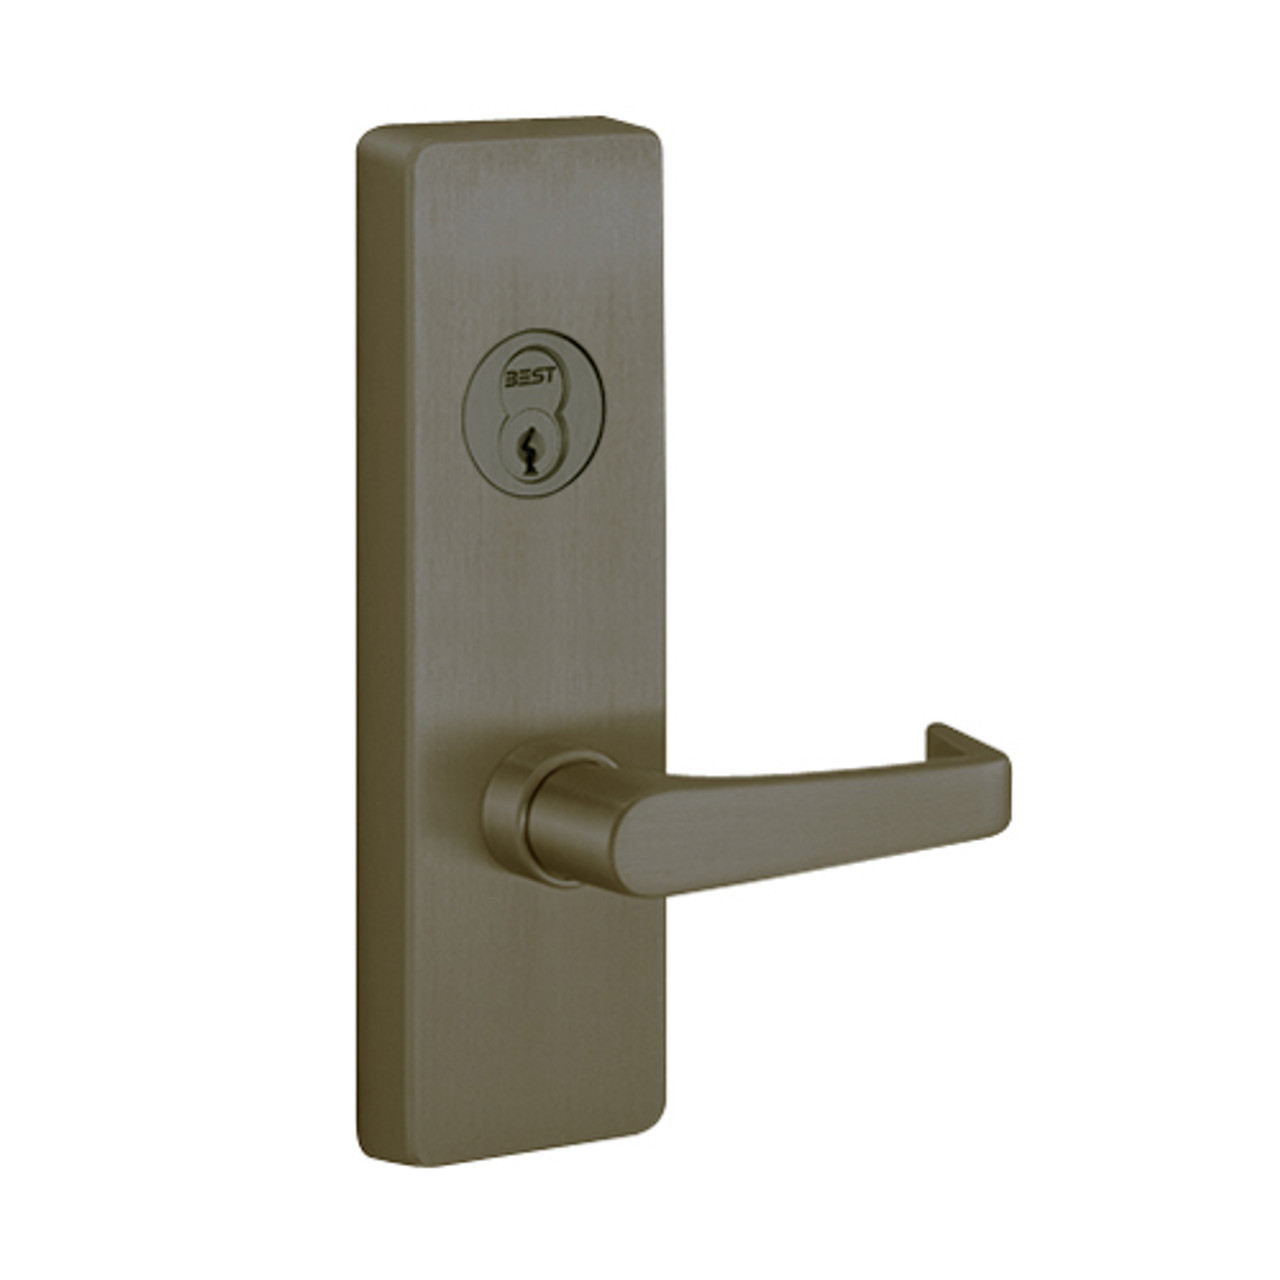 R4903A-613-LHR PHI Key Retracts Latchbolt Retrofit Trim with A Lever Design for Apex and Olympian Series Exit Device in Oil Rubbed Bronze Finish